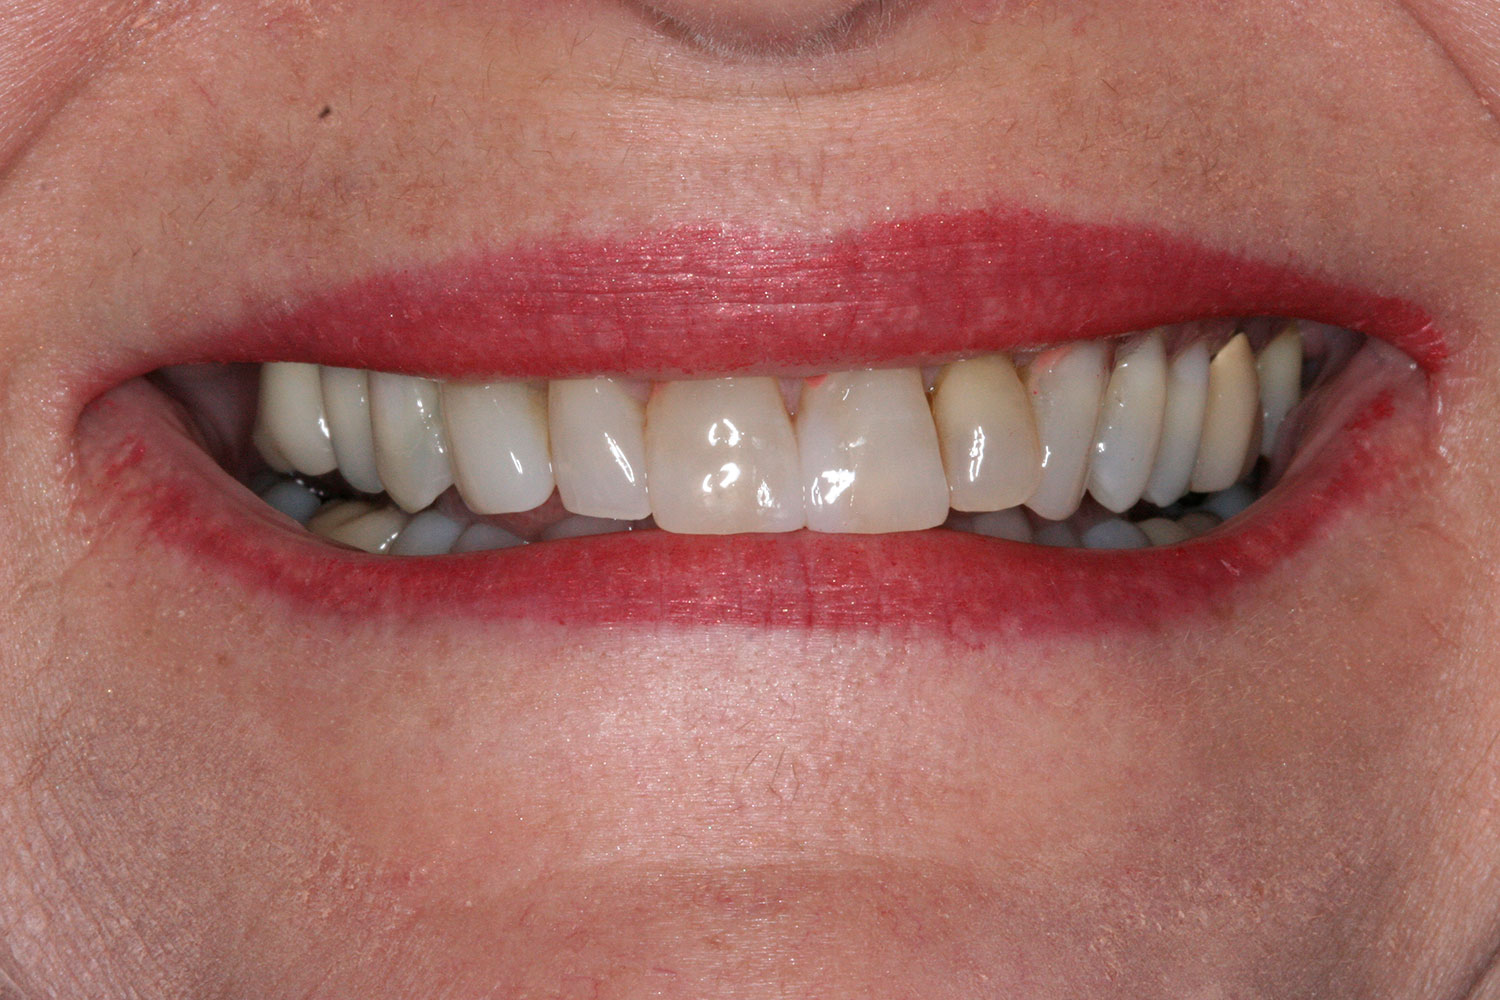 After reshaping teeth